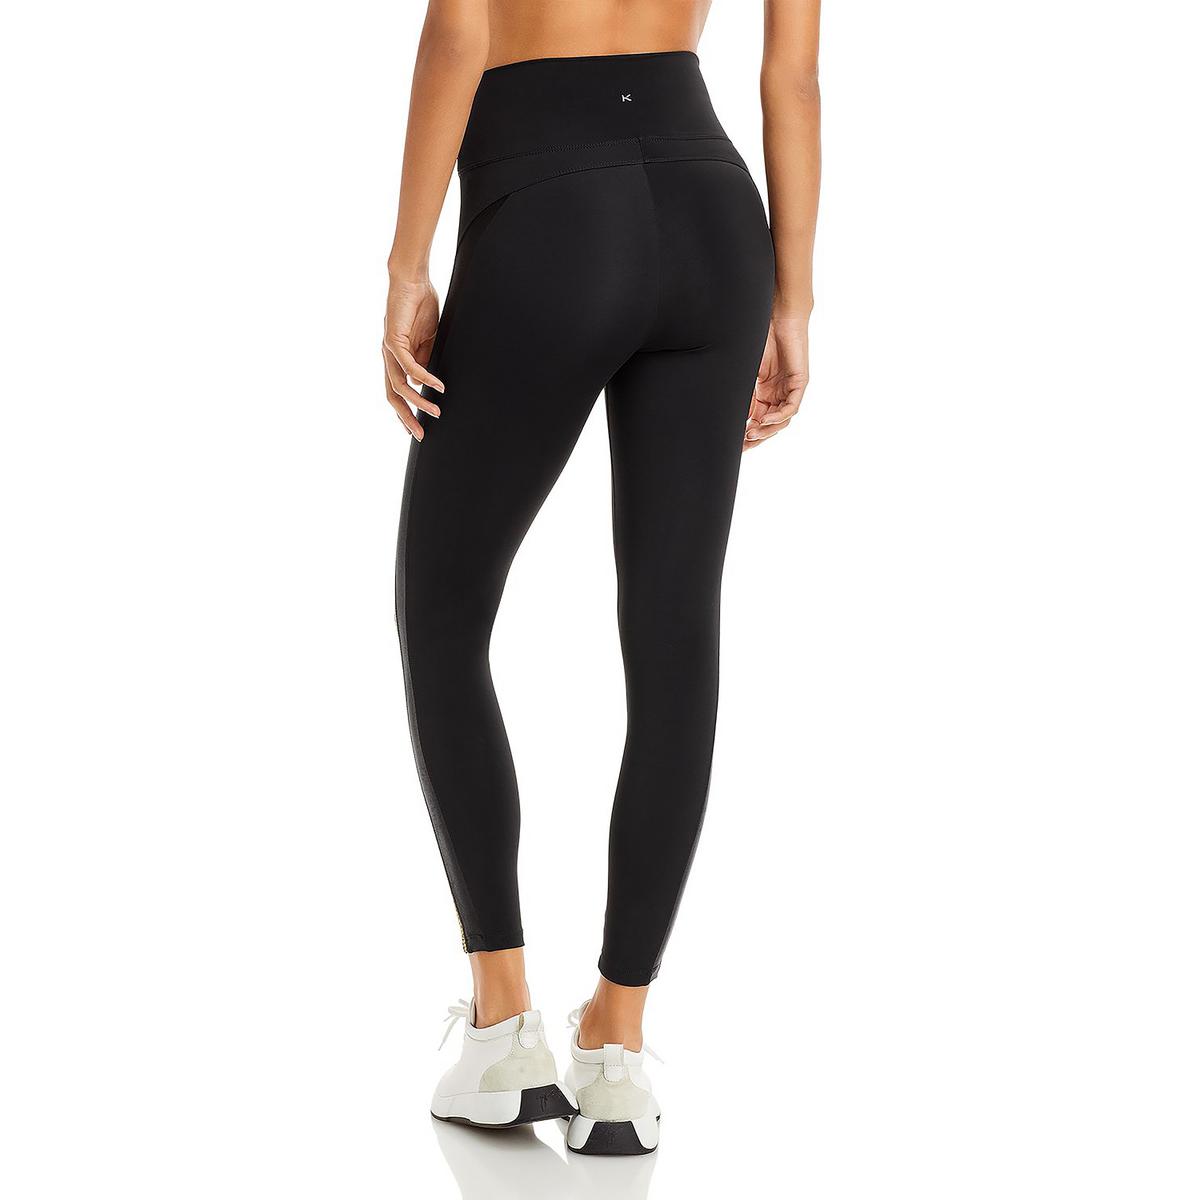 Koral Activewear Womens Knit High Rise Fitness Athletic Leggings BHFO 4207